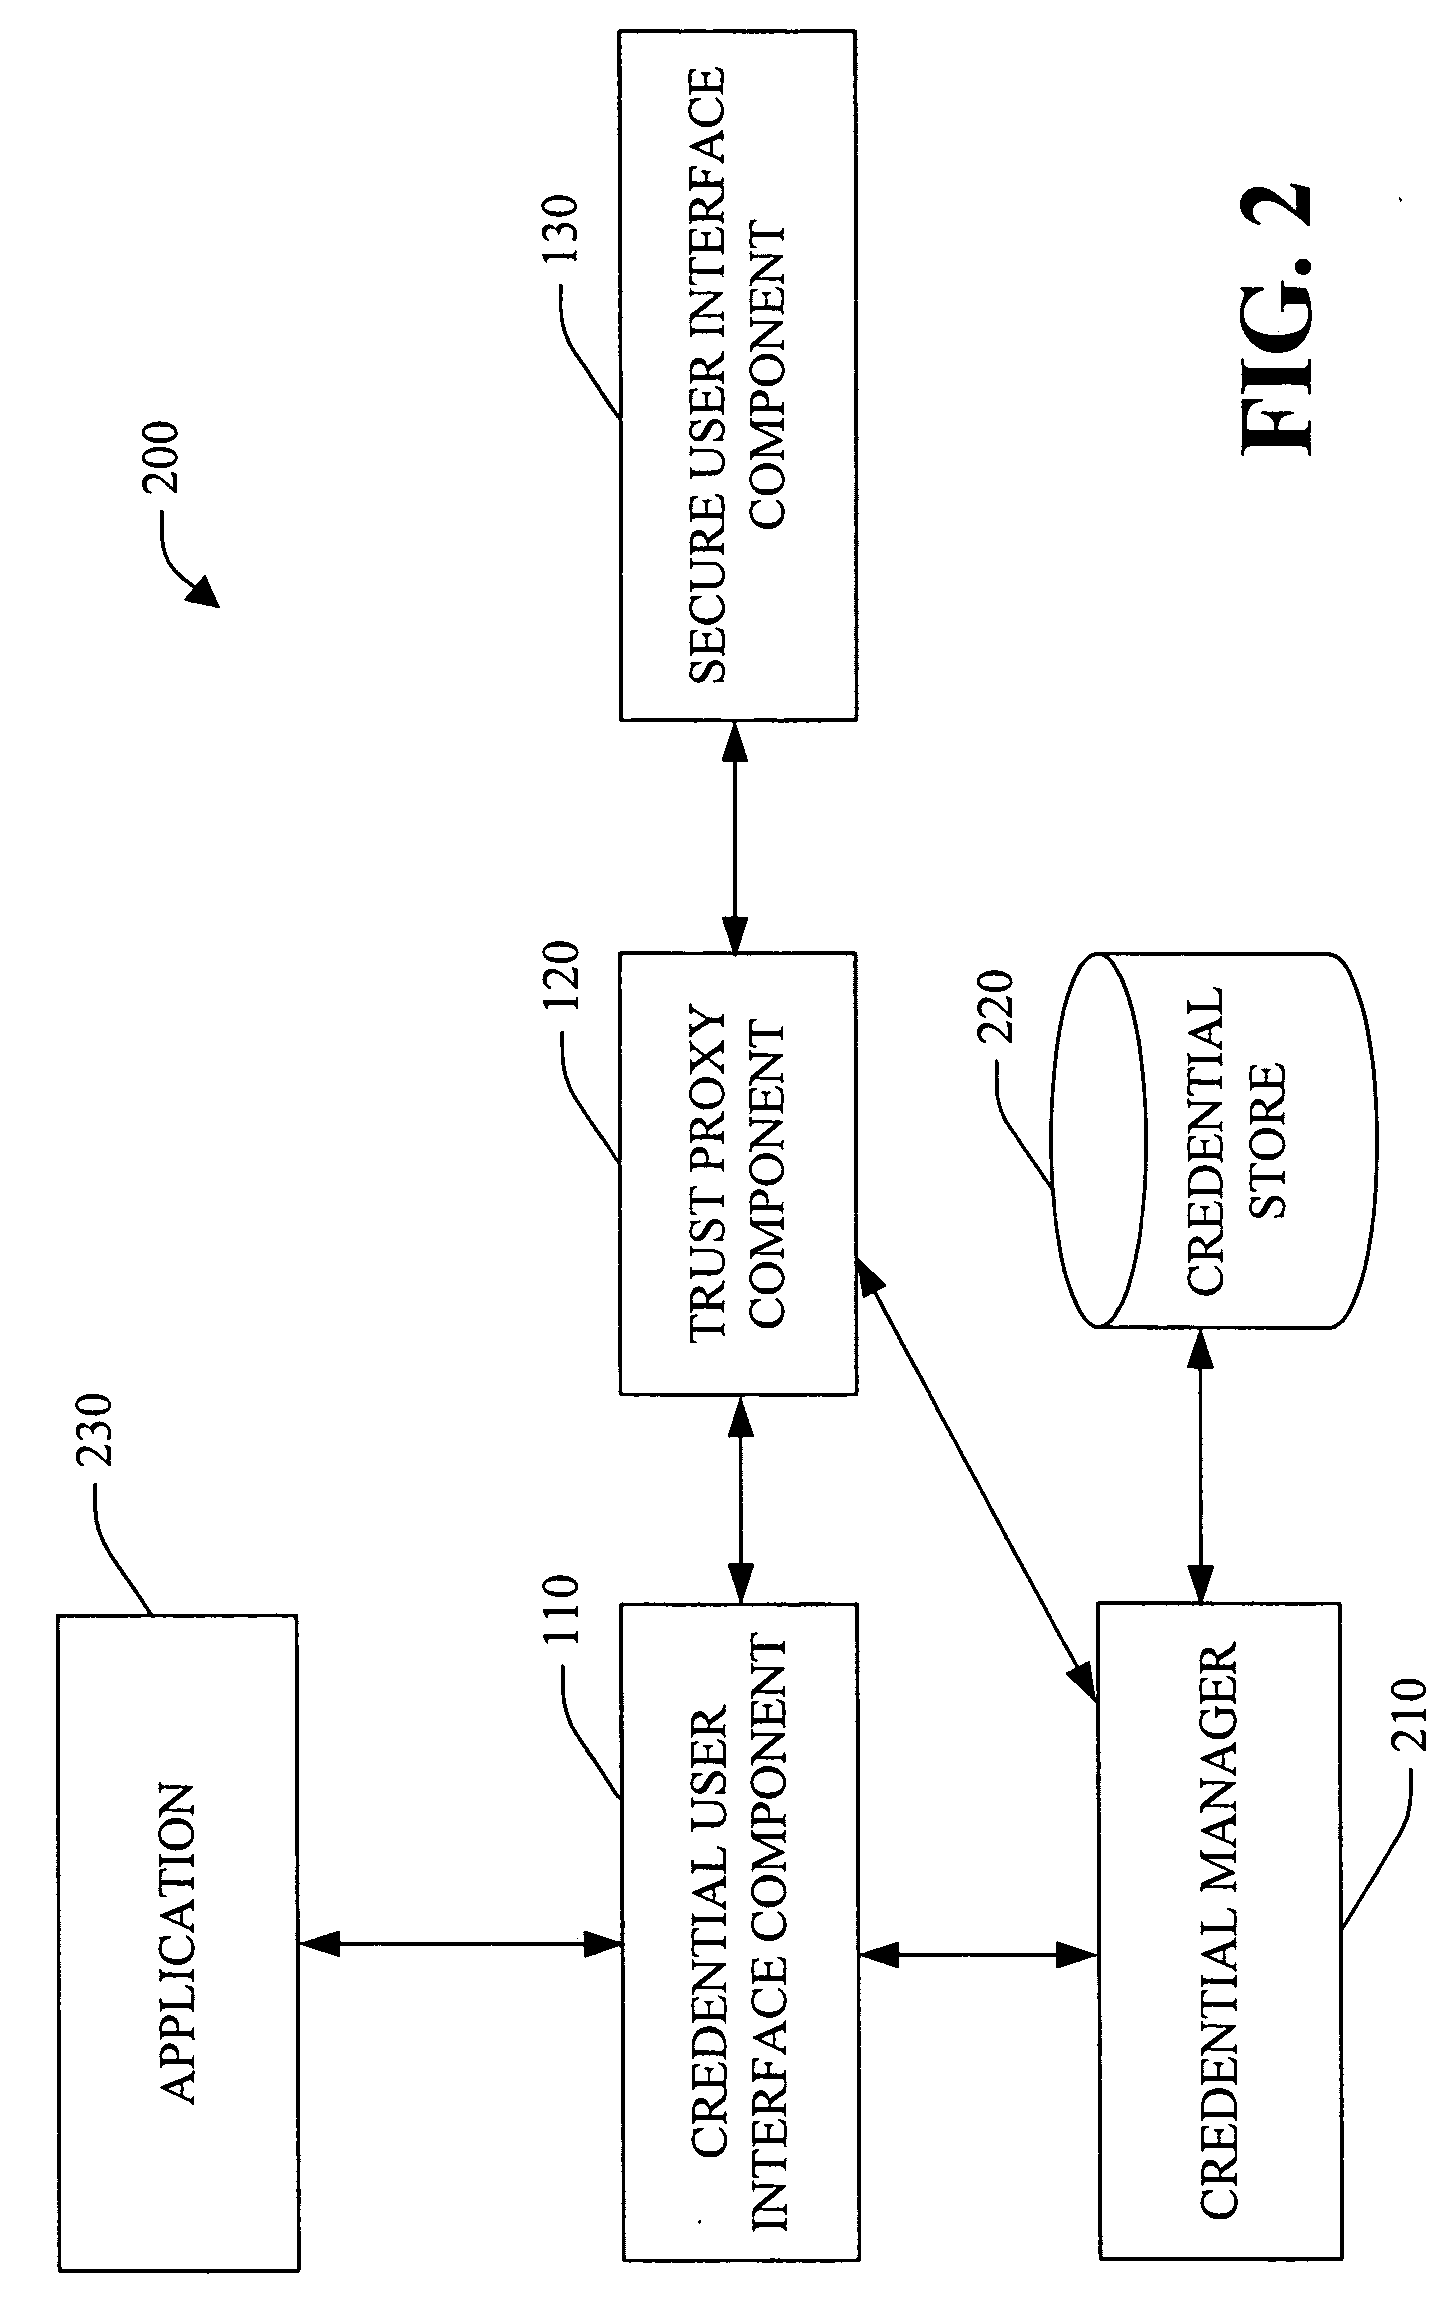 System and method facilitating secure credential management